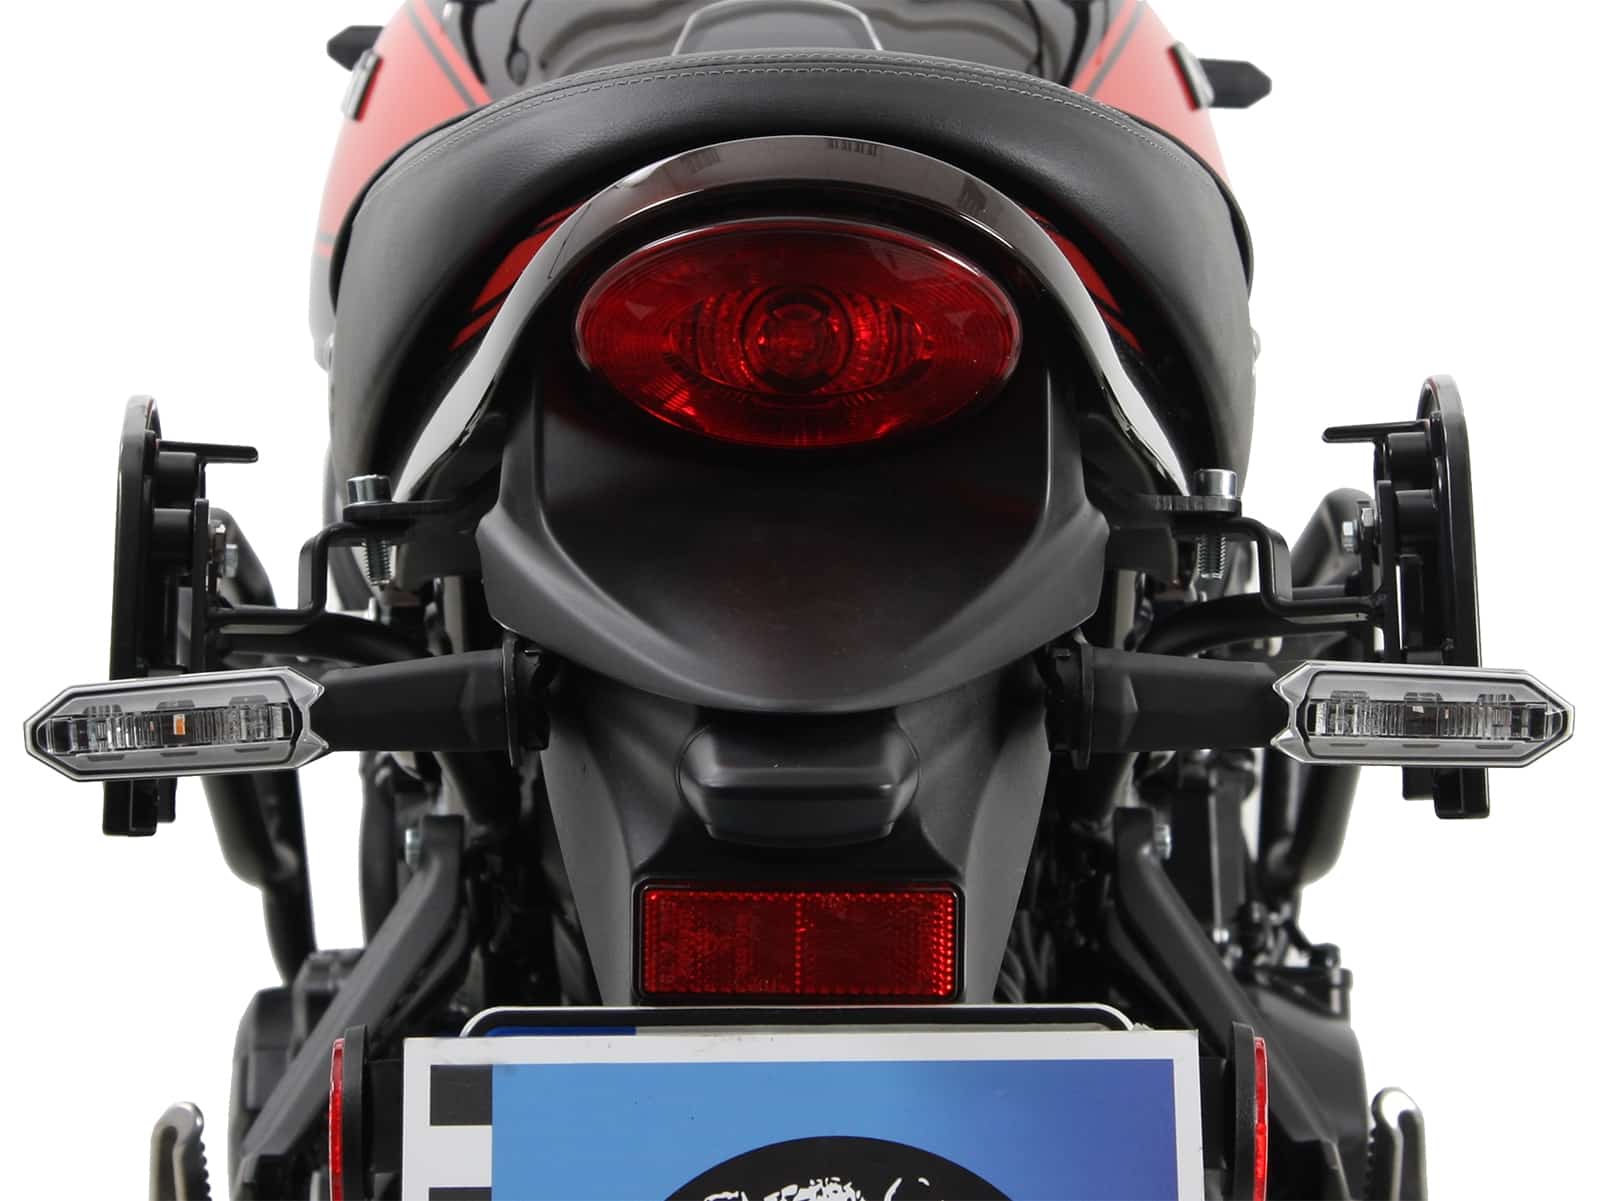 C-Bow sidecarrier black for Kawasaki Z 900 RS/Cafe (2018-)